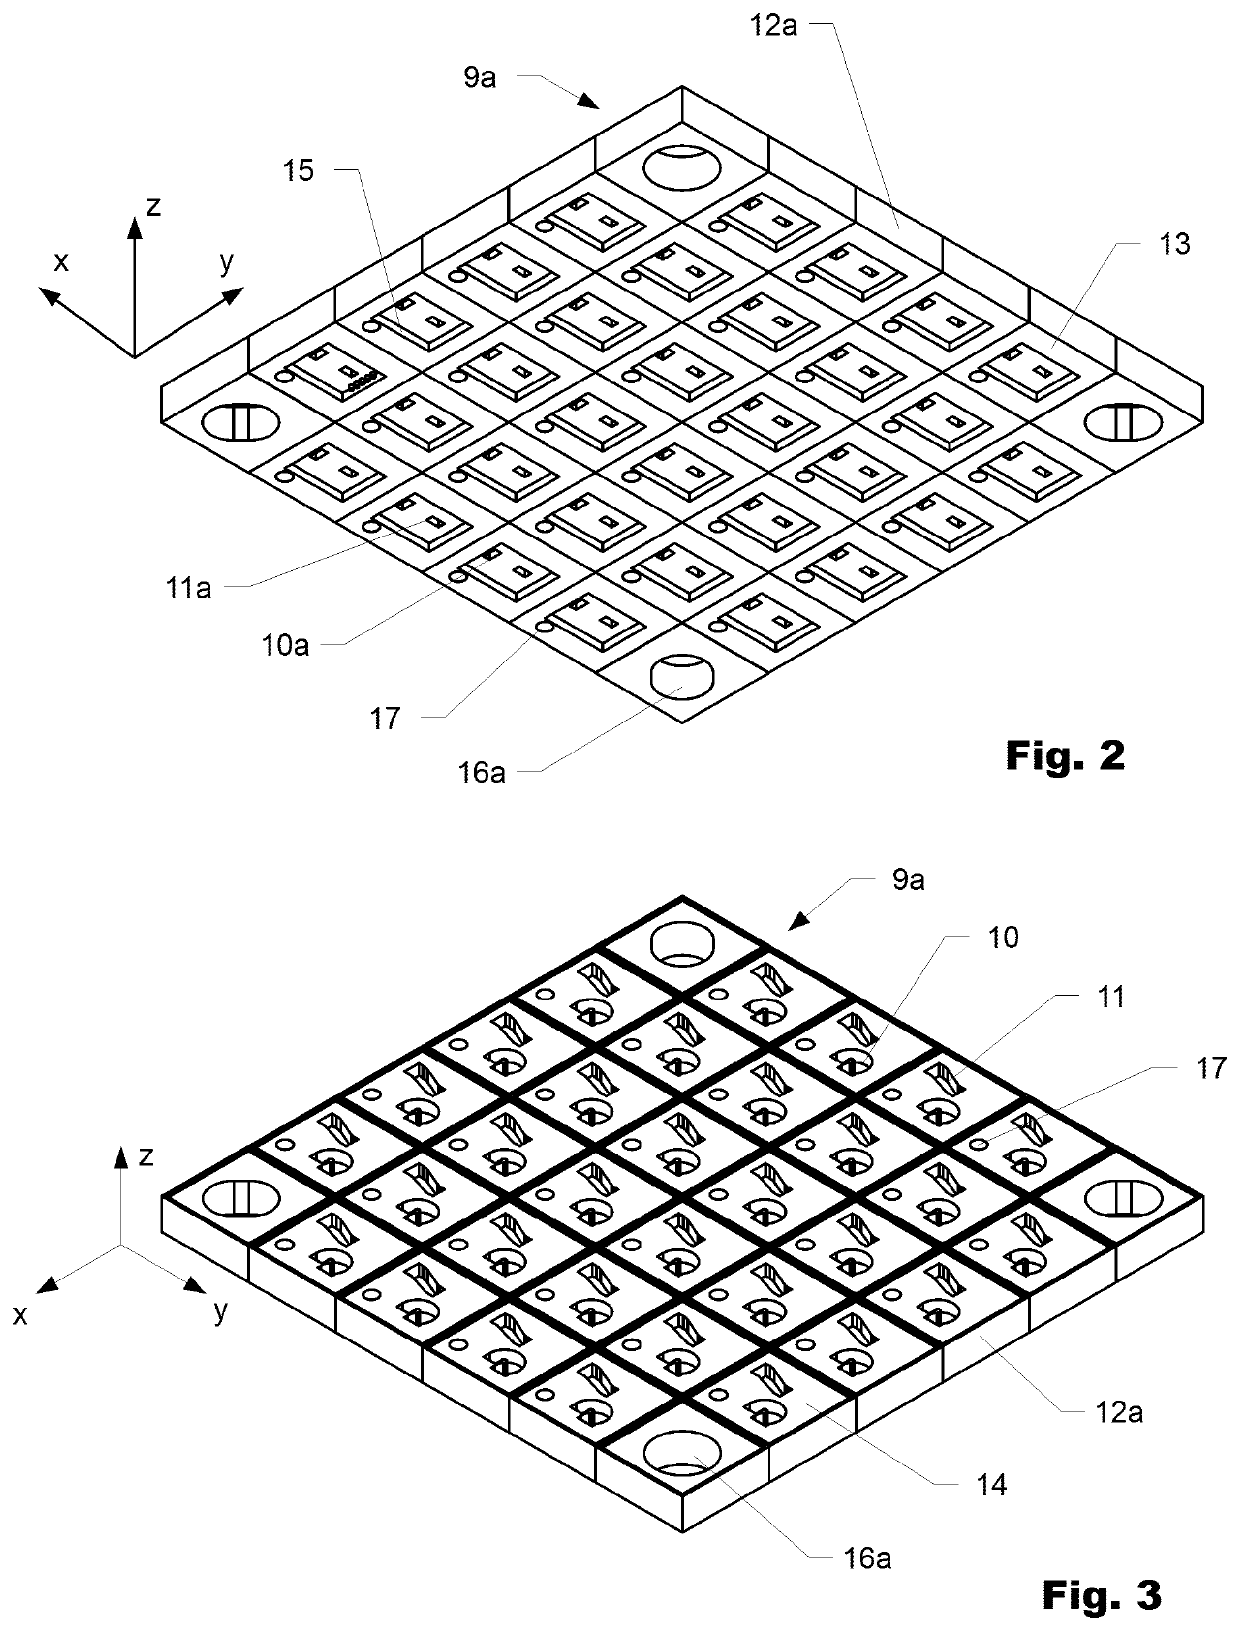 Interconnection assembly for data communication